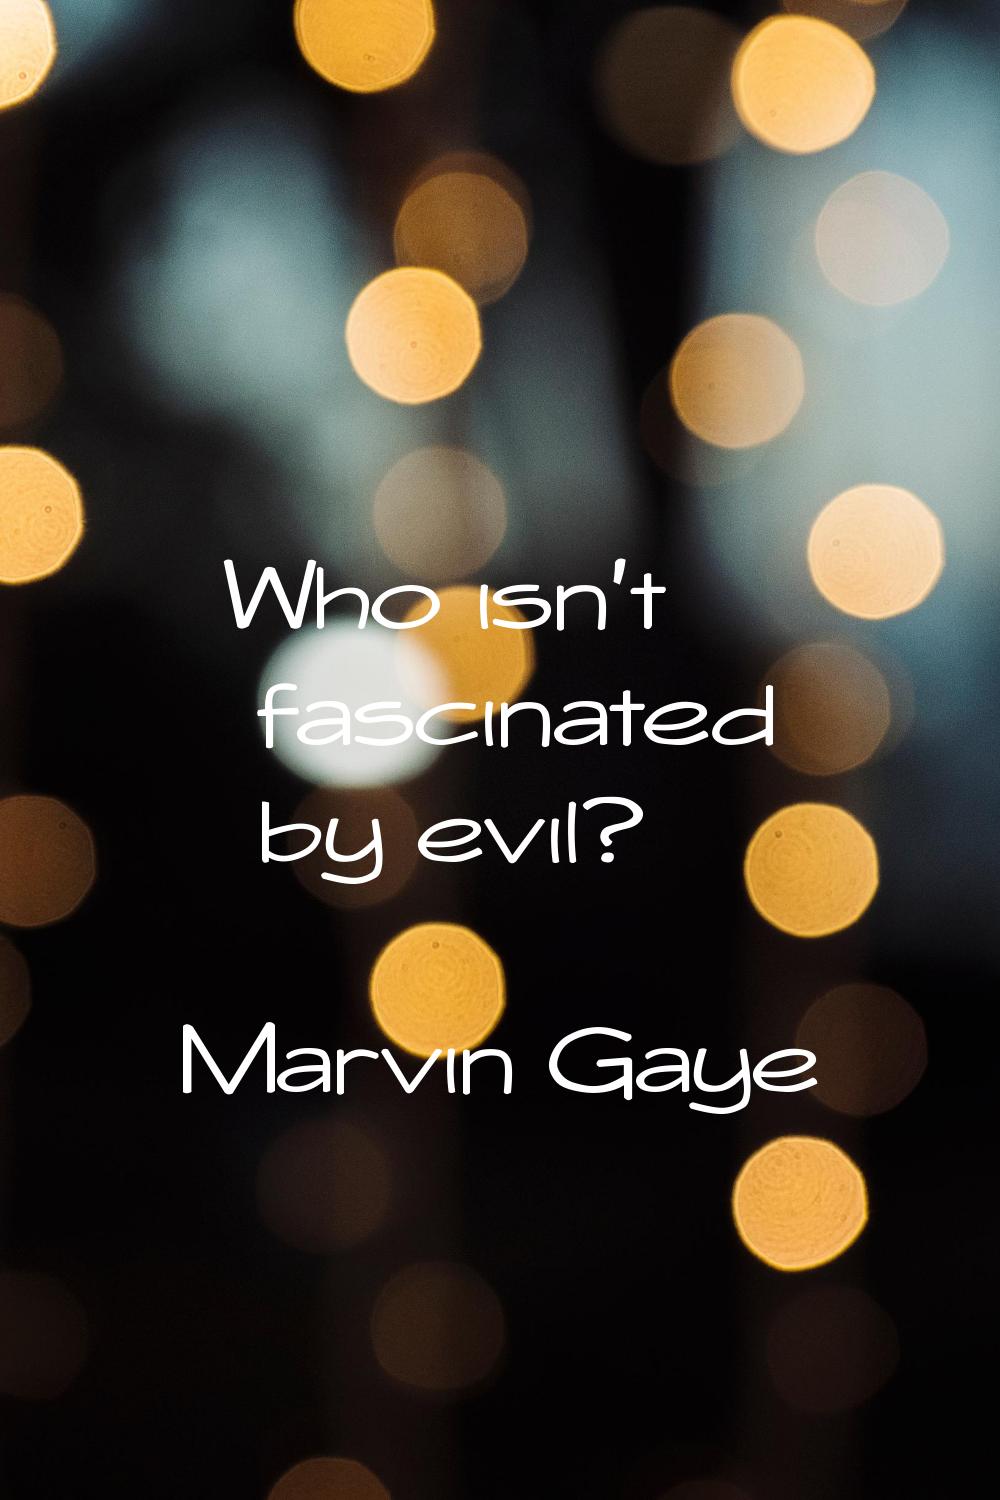 Who isn't fascinated by evil?